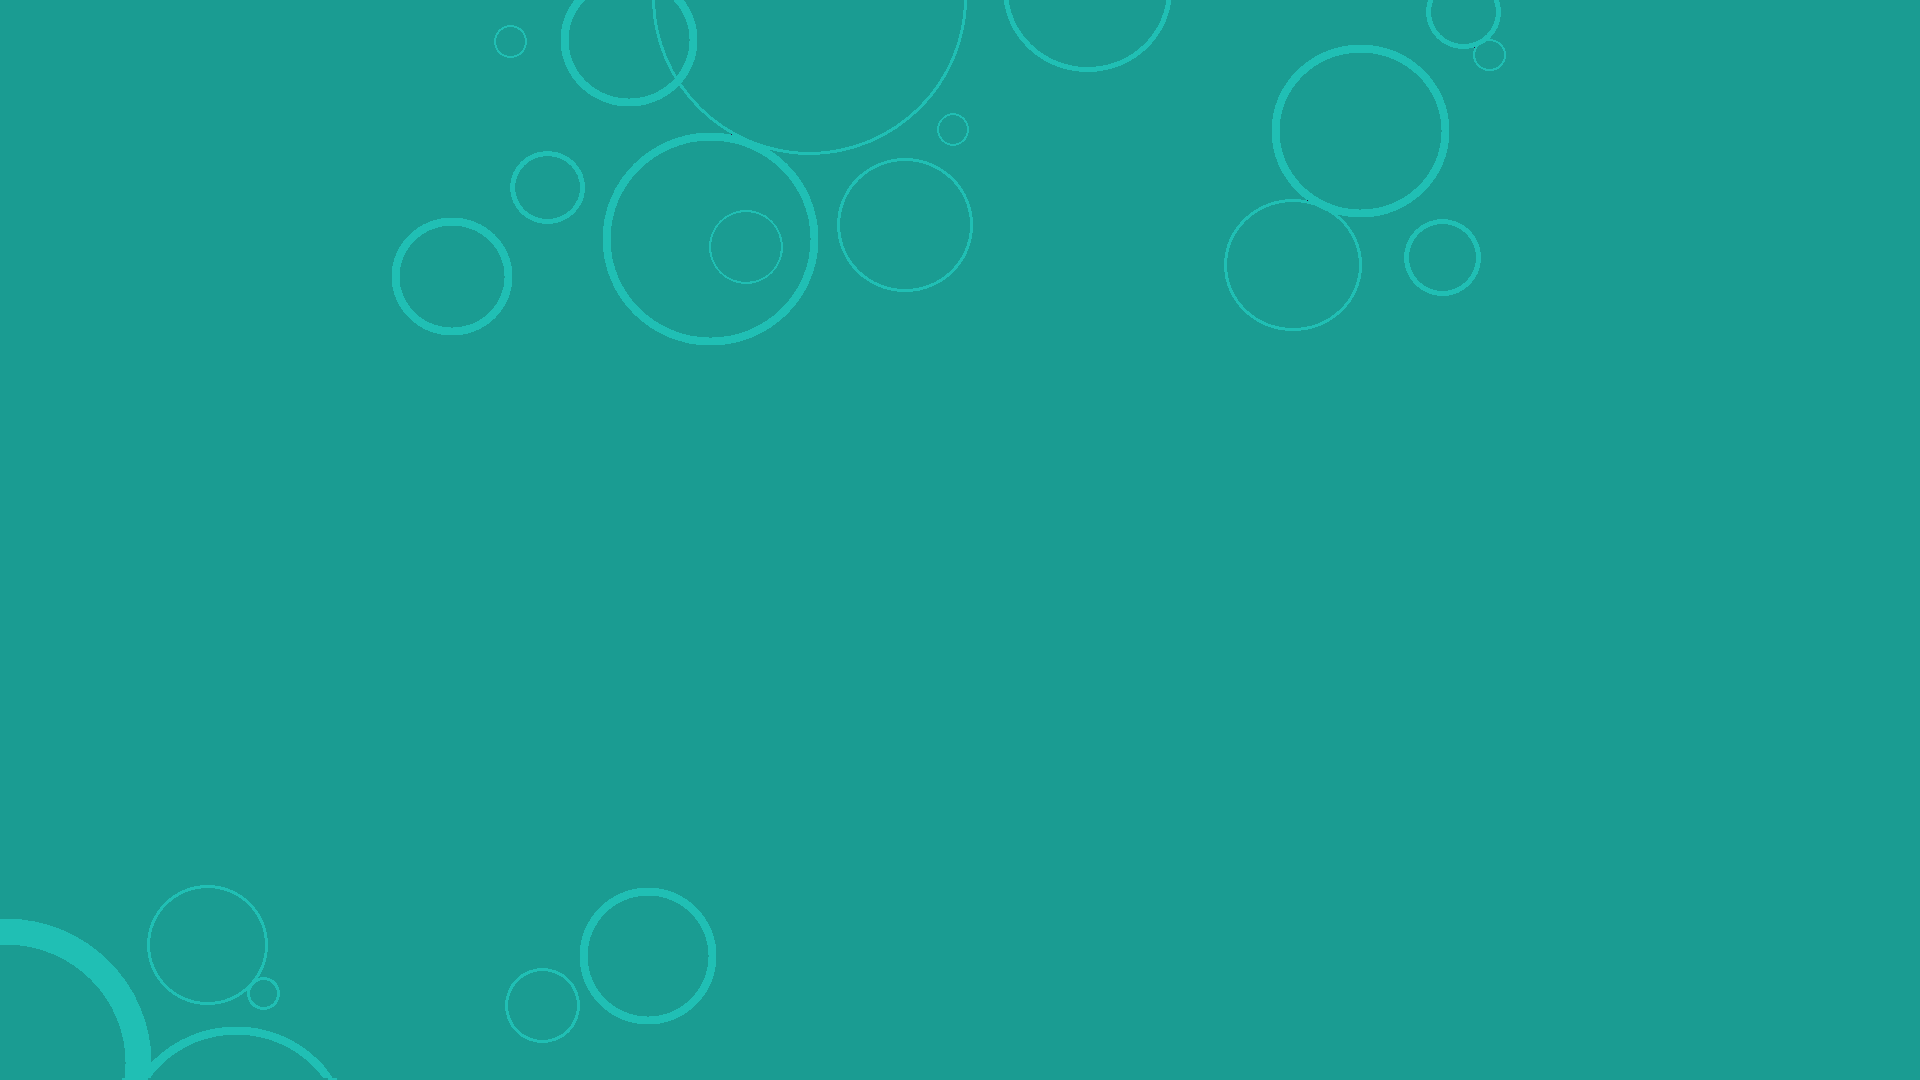 Teal Windows 8 Bubbles Background